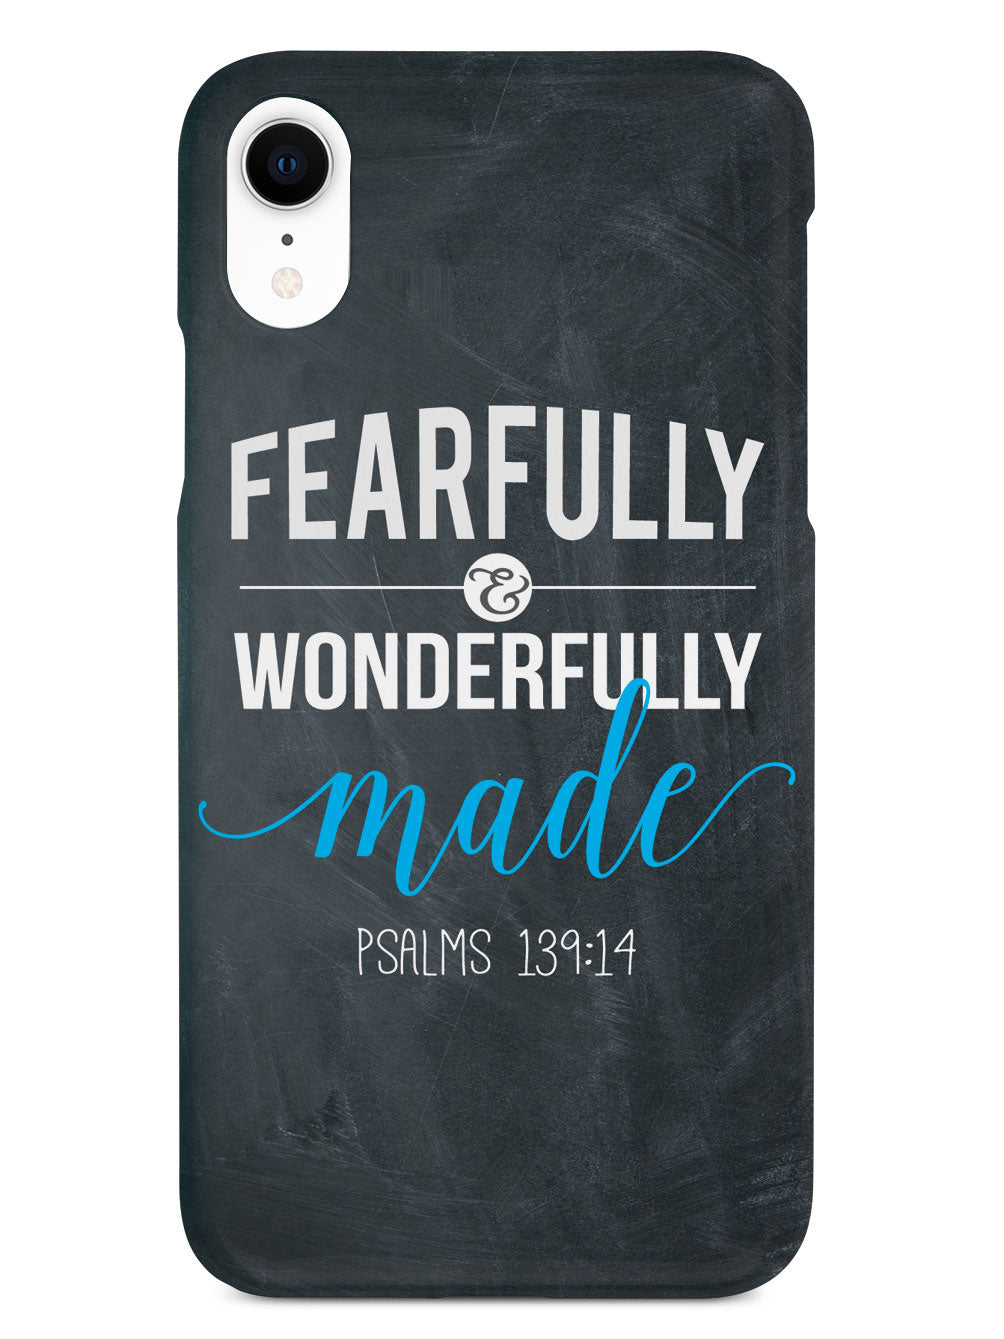 Psalms 139:14 Bible Verse Quote Case